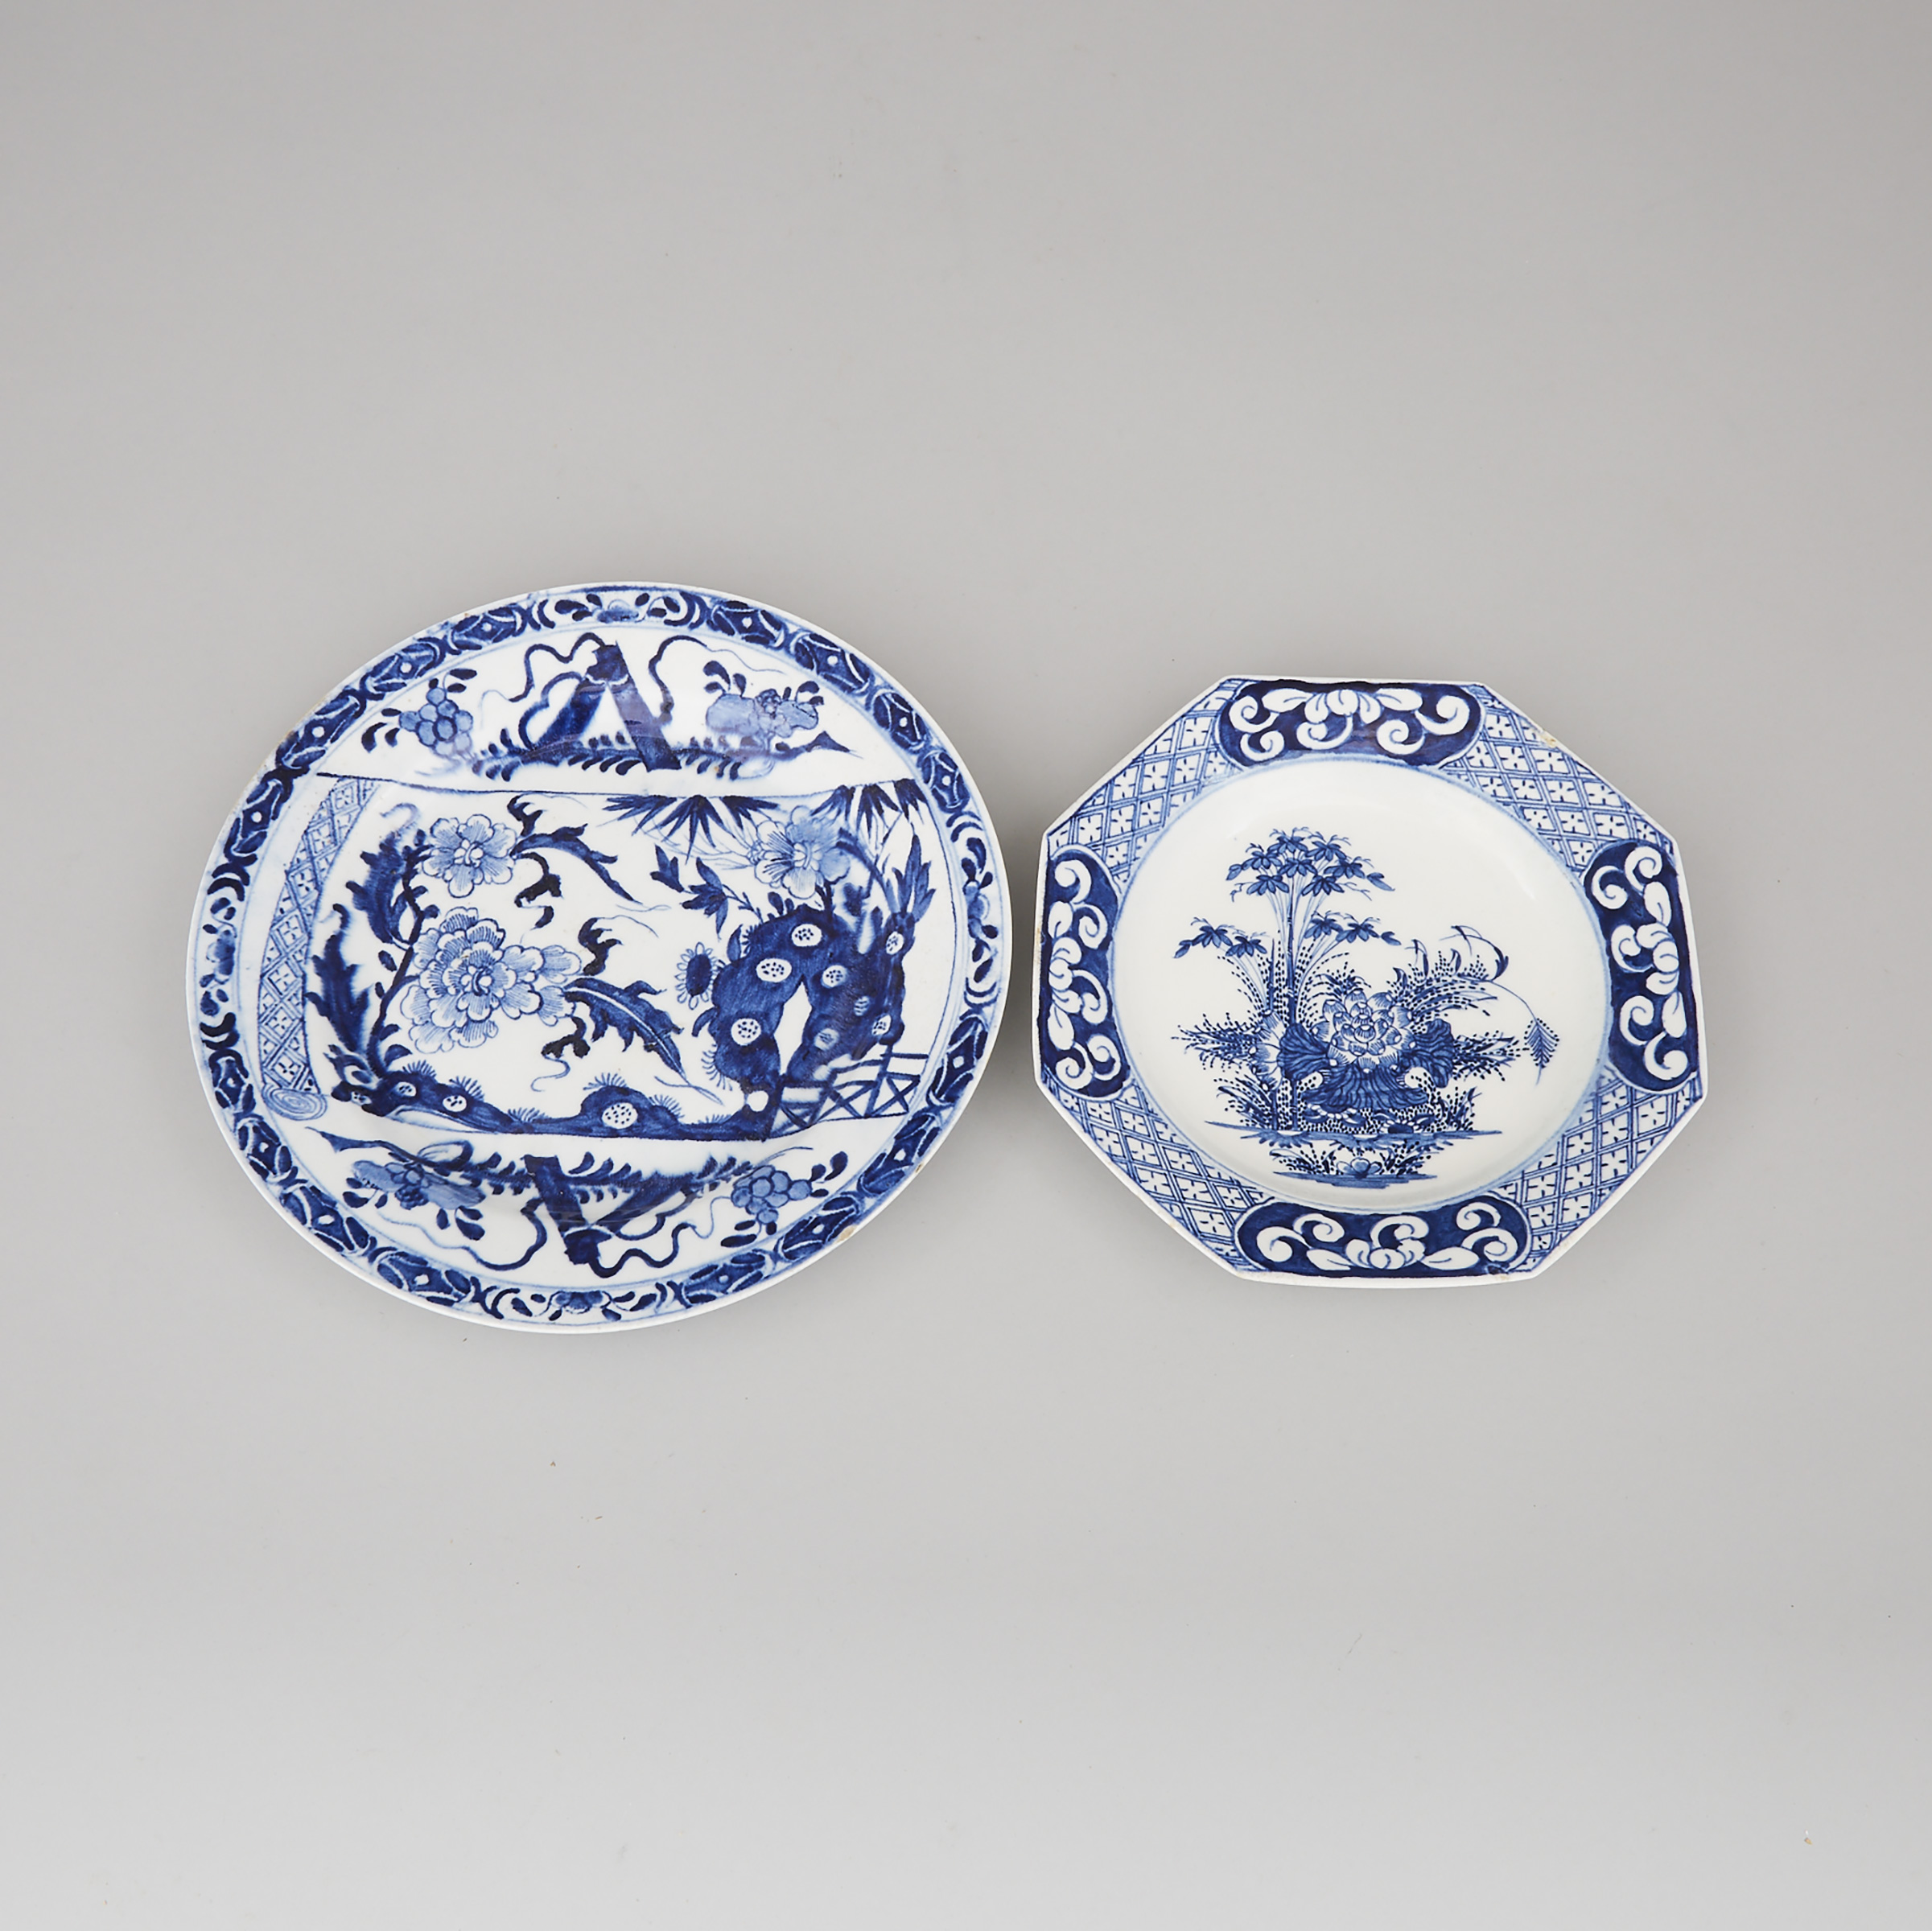 Bow Blue and White Octagonal Dish and a Larger Plate, c.1760